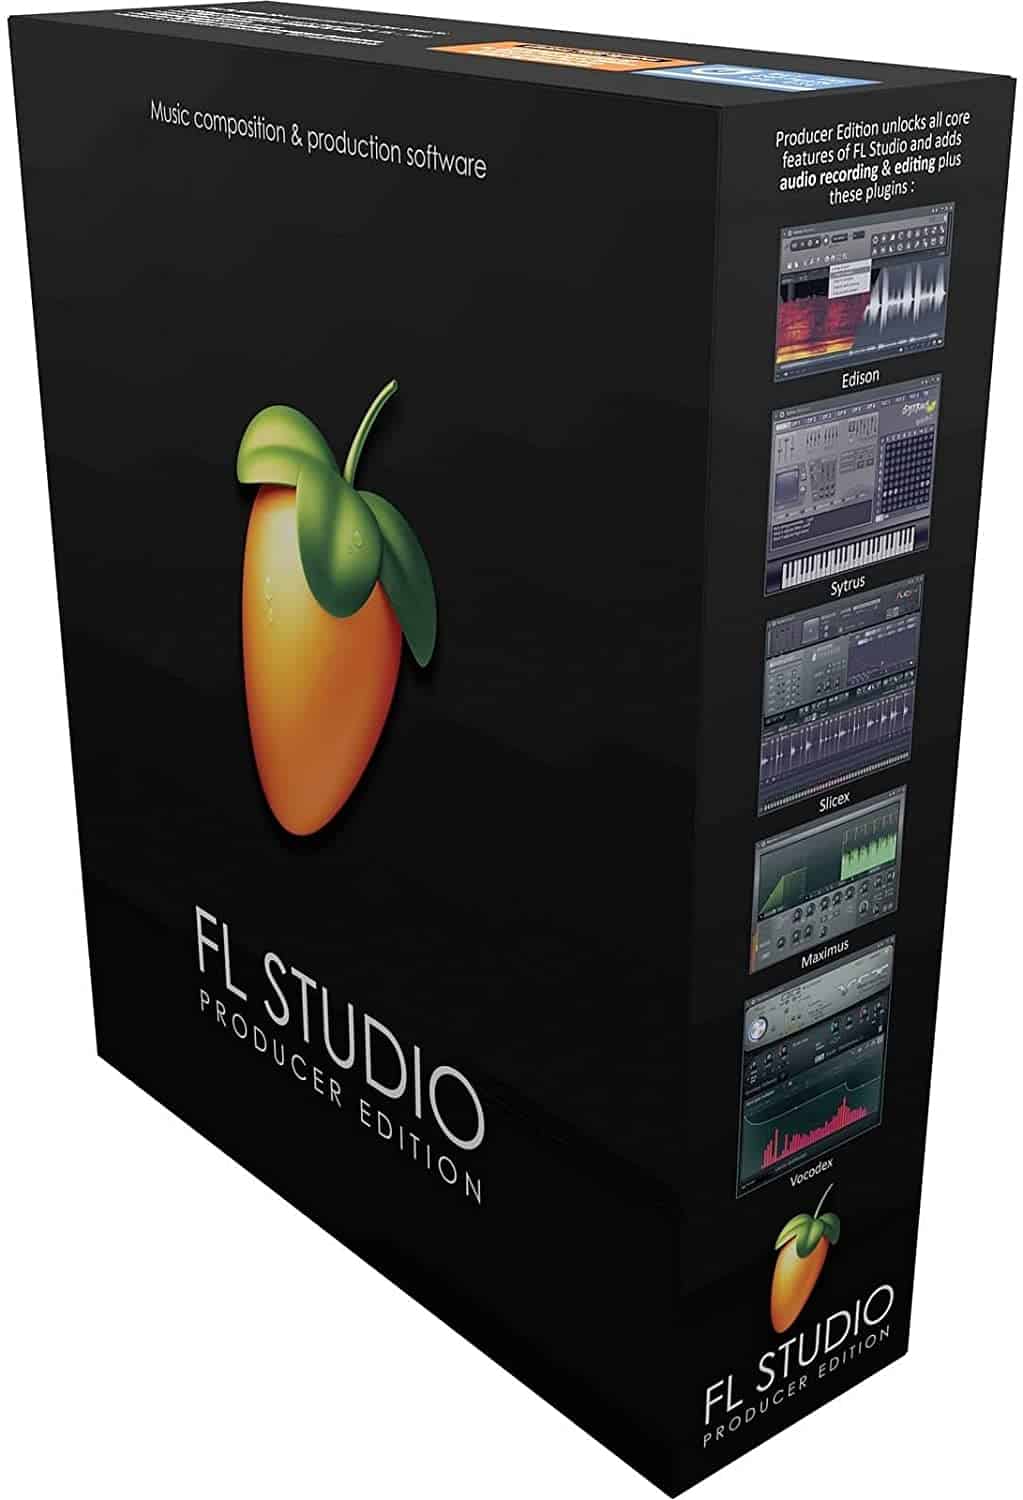 is fl studio demo available forever